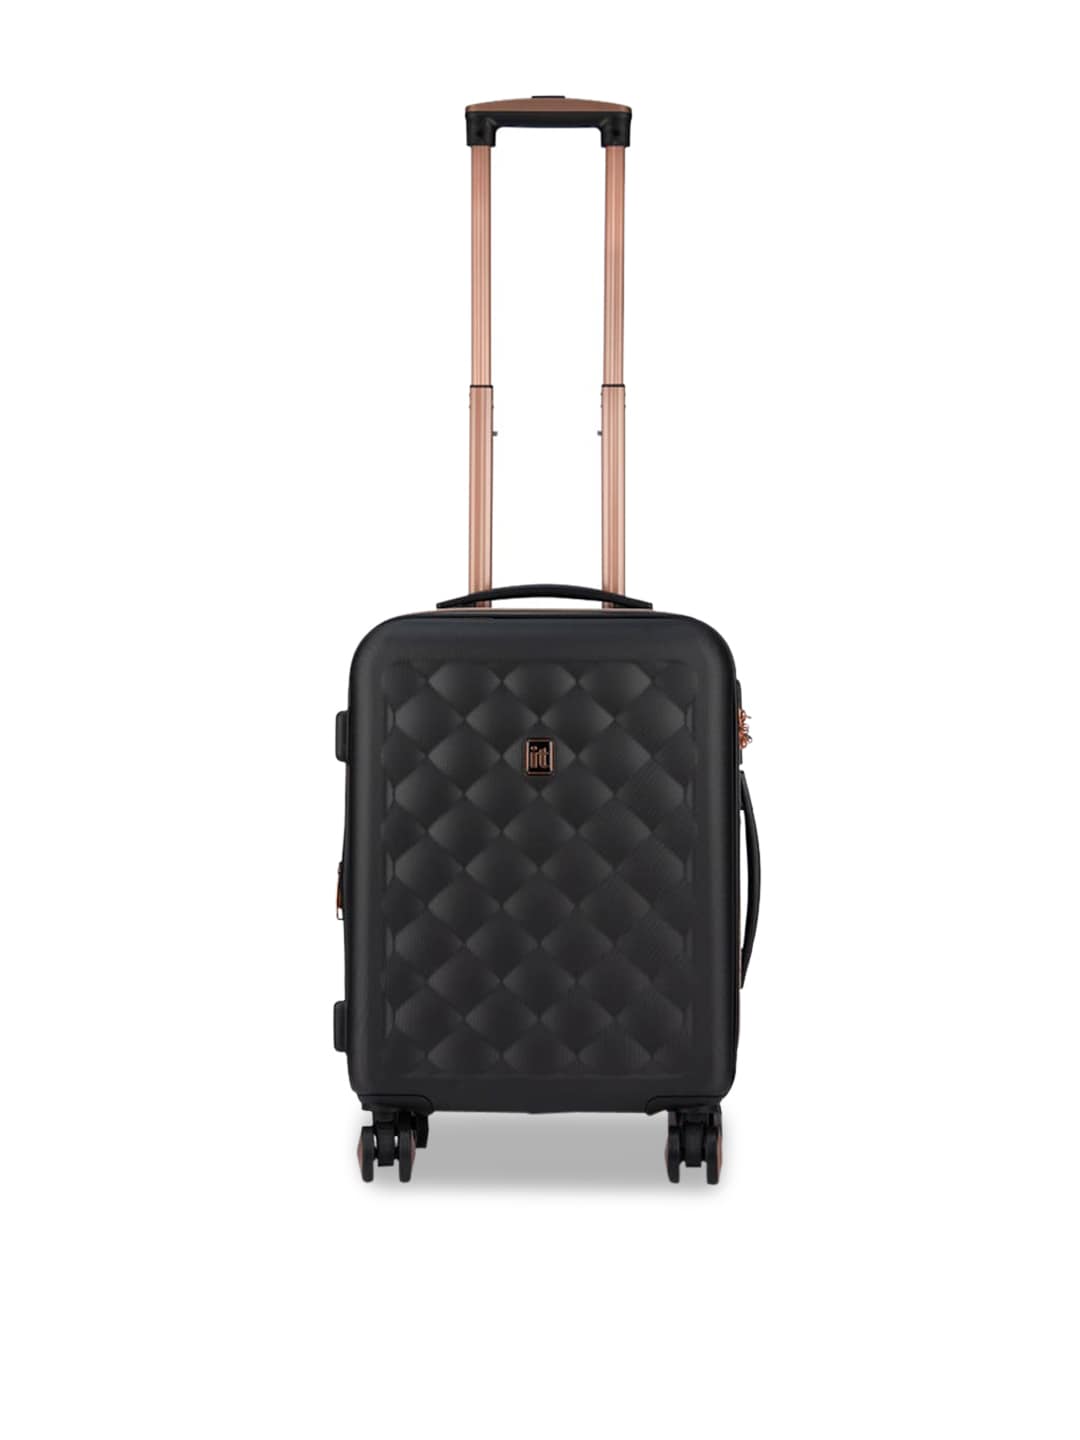 IT luggage Black Textured Hard-Sided Cabin Trolley Suitcases Price in India